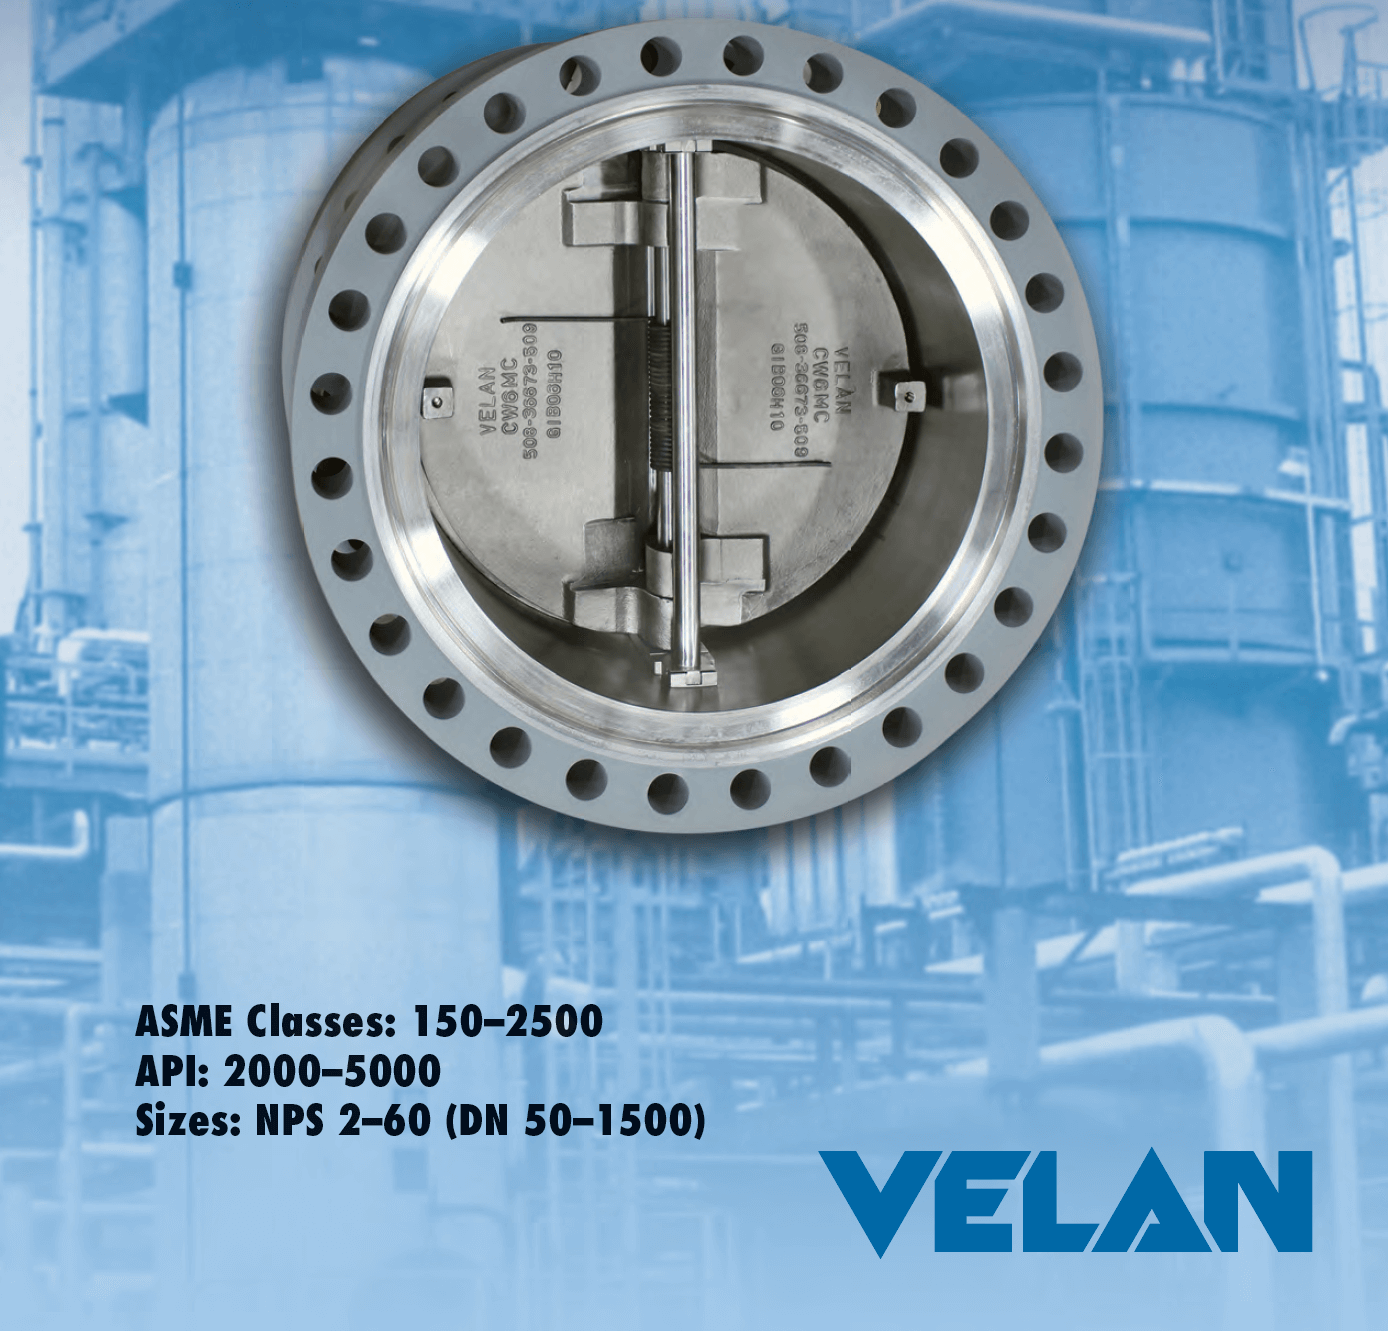 dual-plate check valve with ASME clases and sizes specified